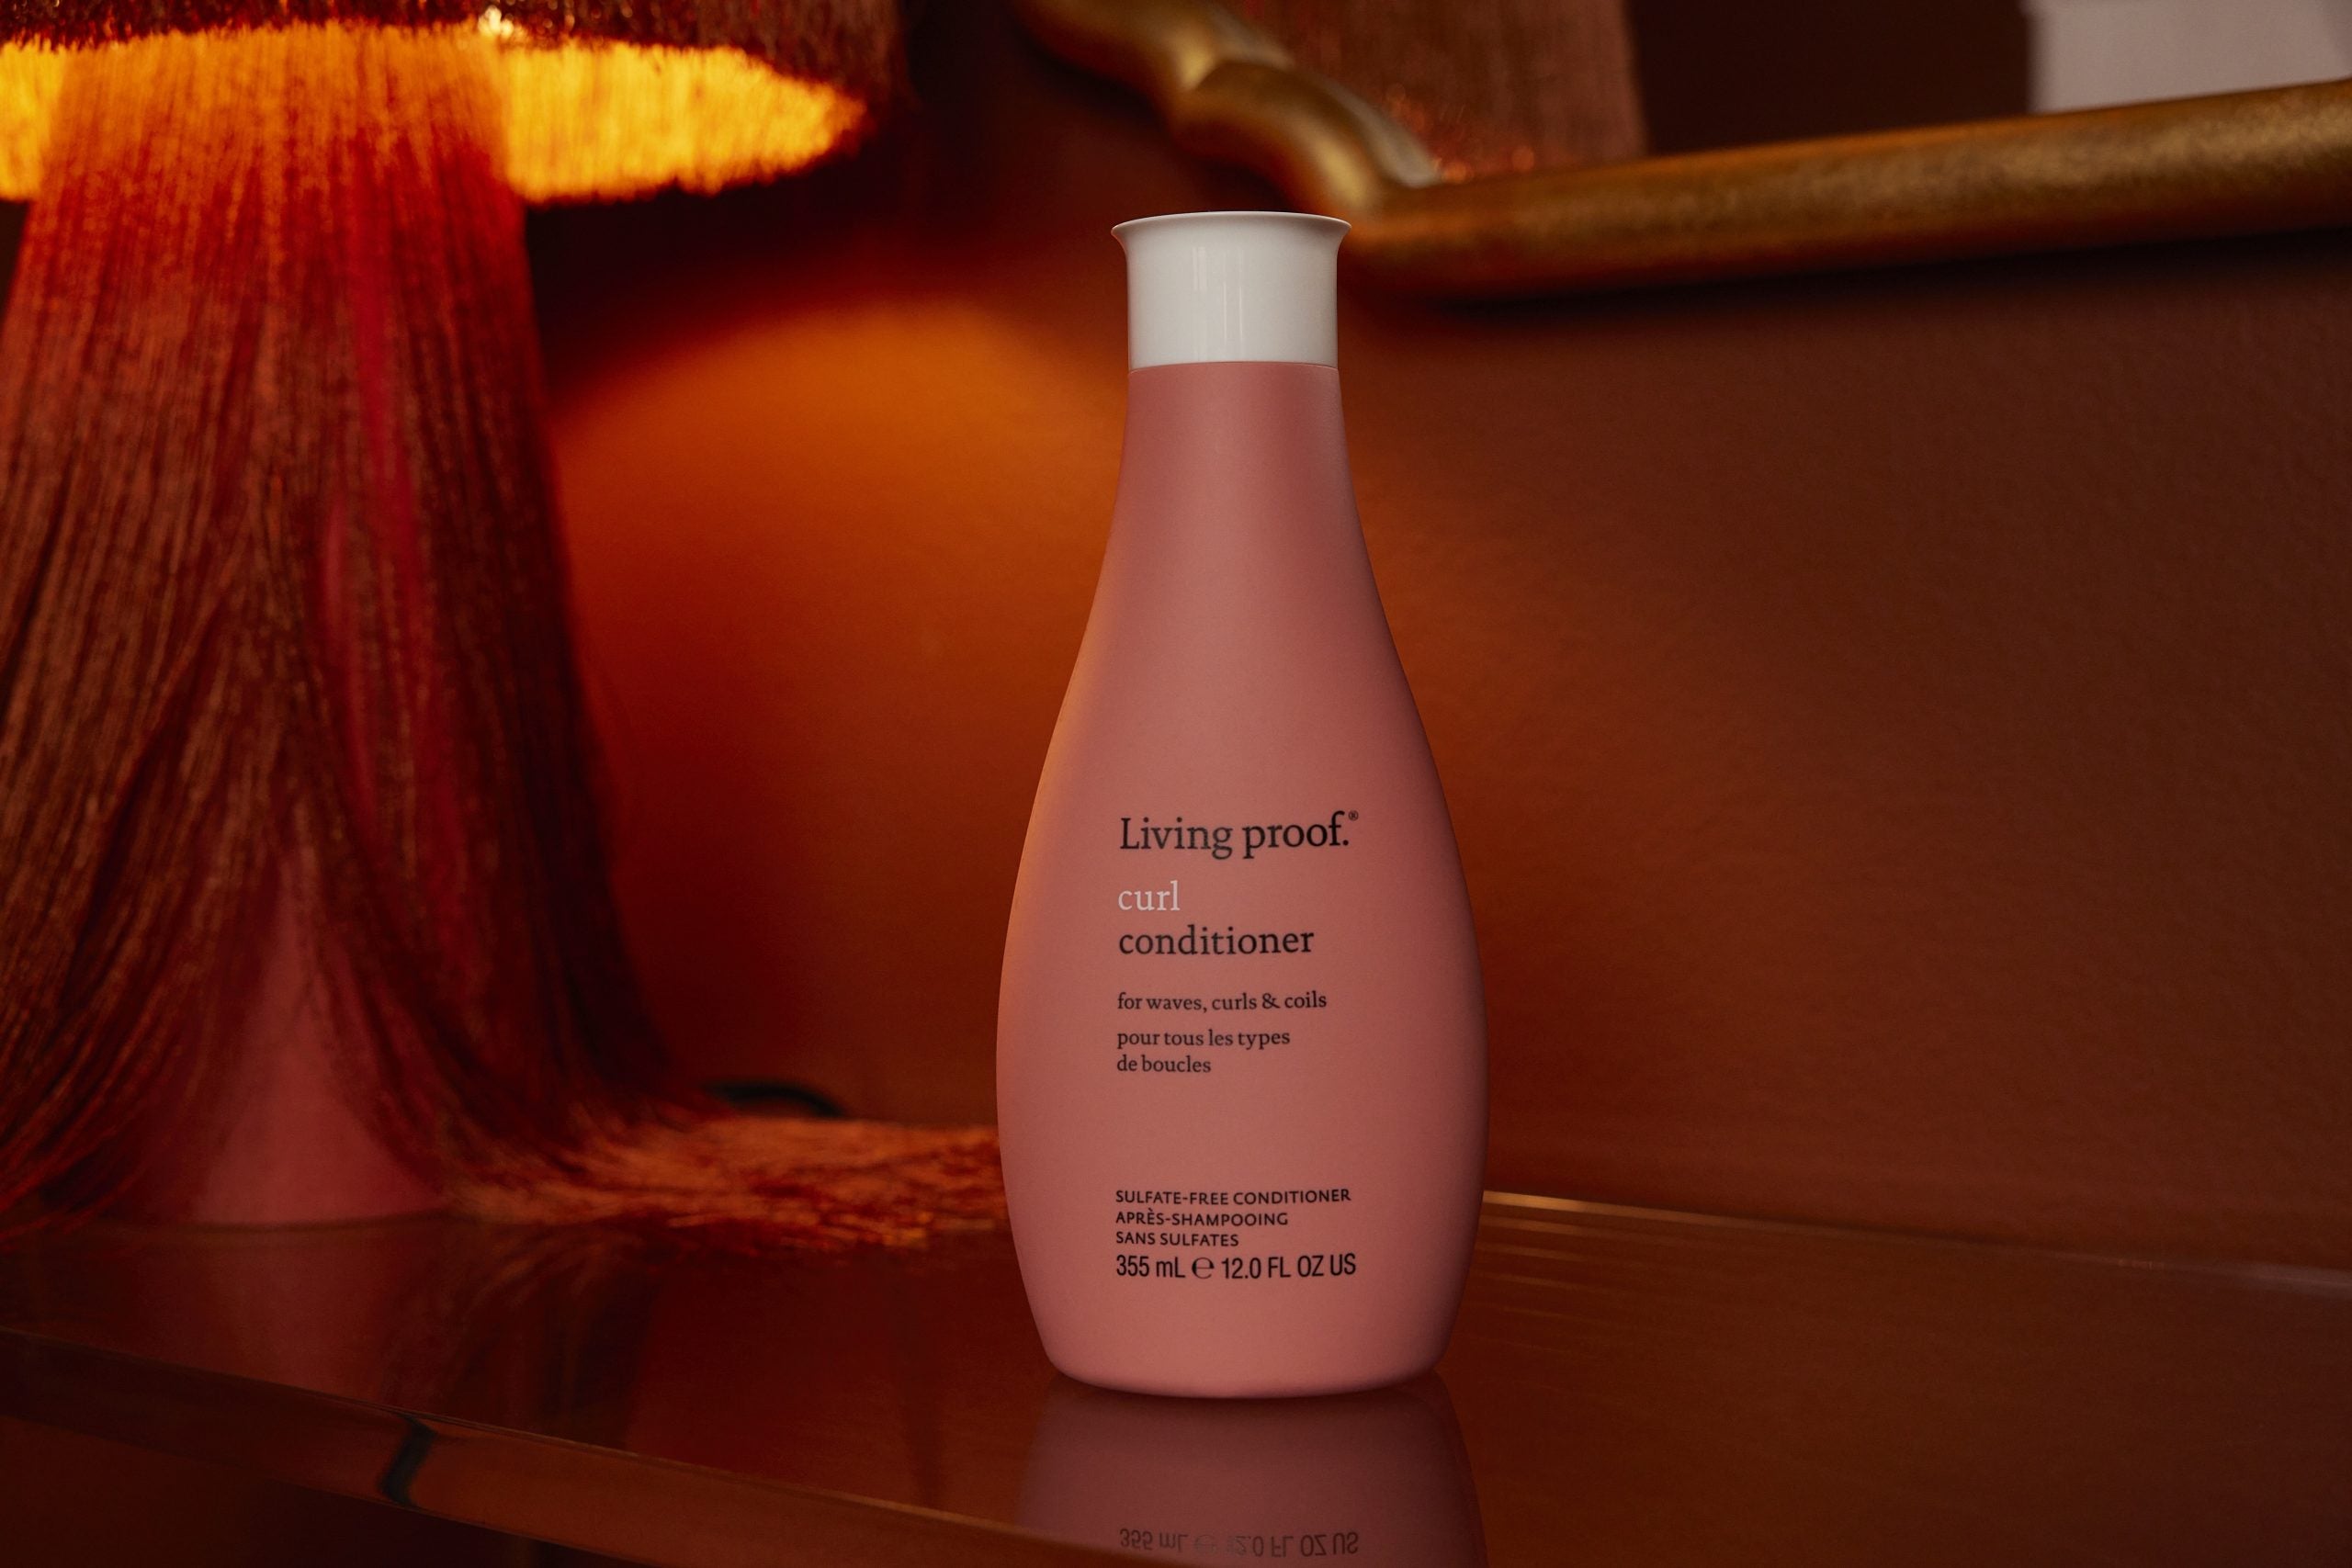 Living Proof’s Curl Line Is A One-Stop Shop For Moisture And Hydration